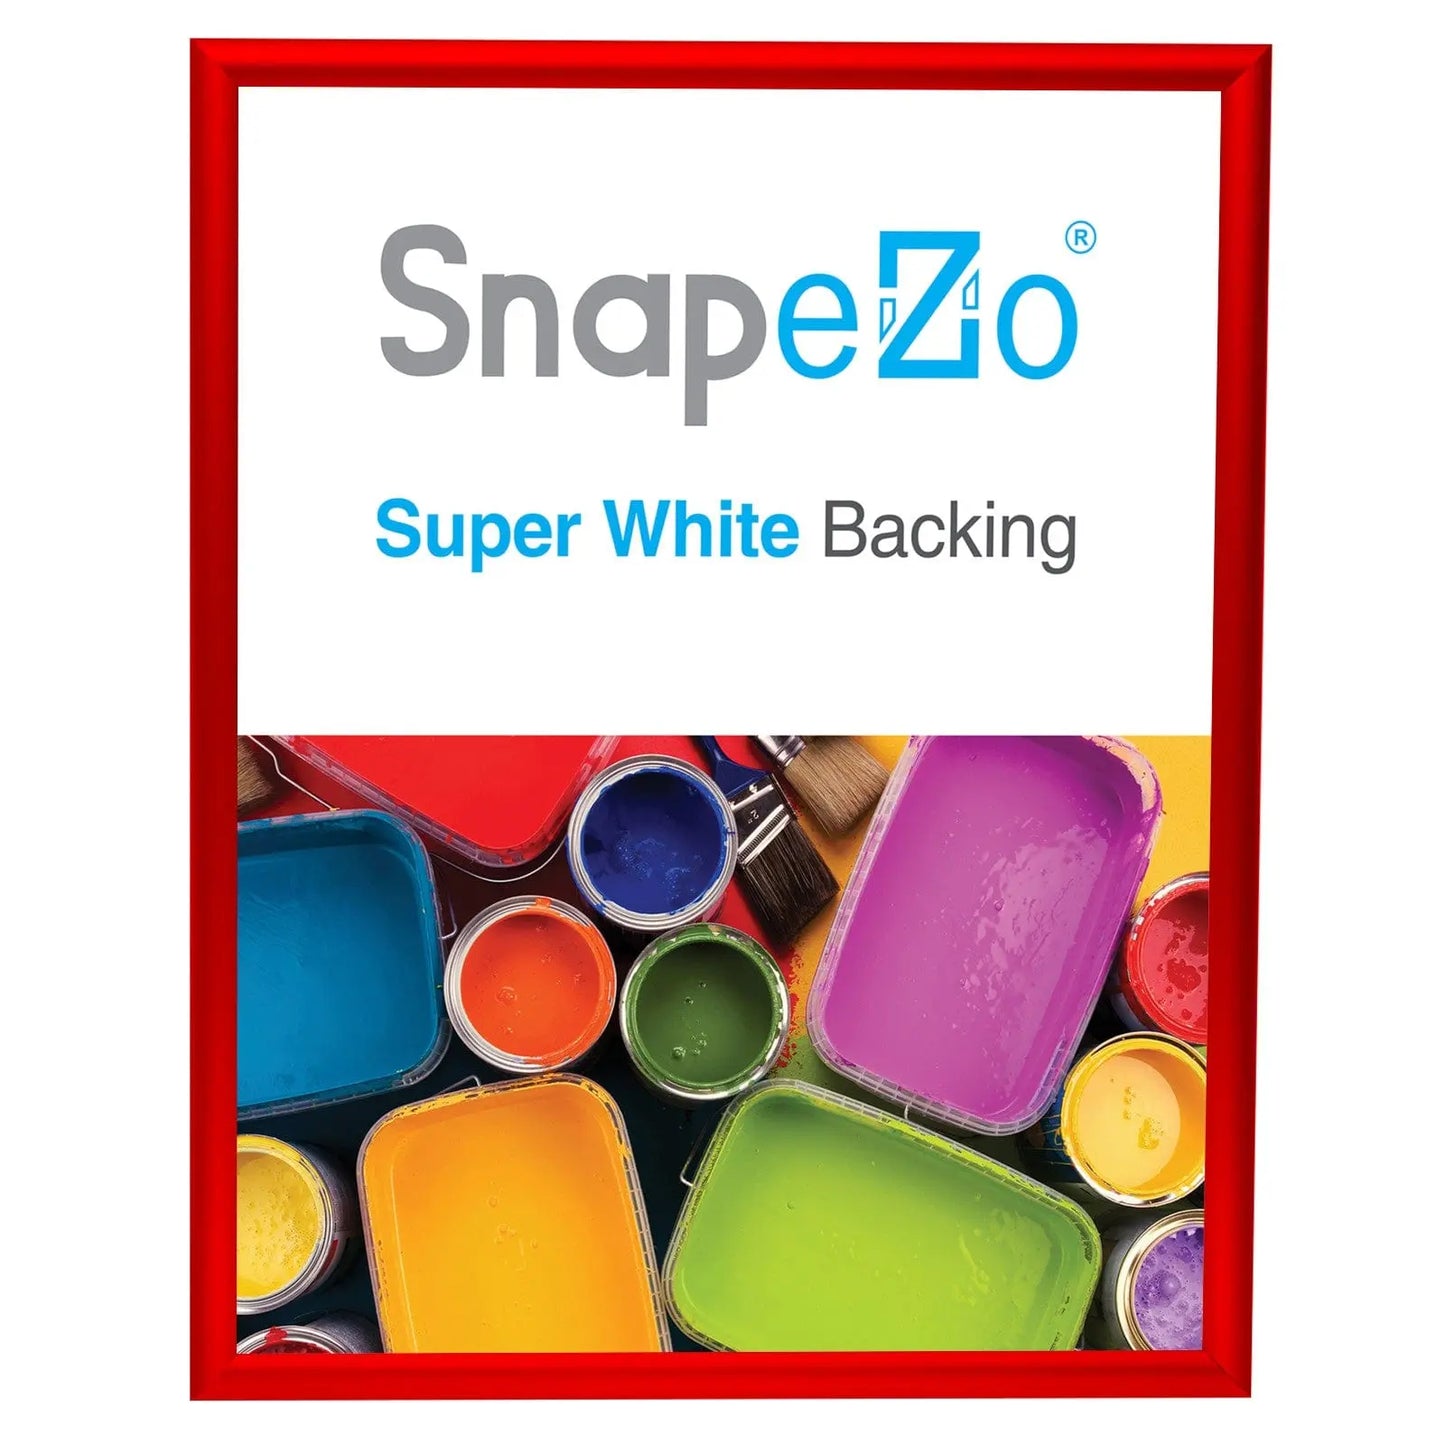 18x24 Red SnapeZo® Snap Frame - 1" Profile - Snap Frames Direct